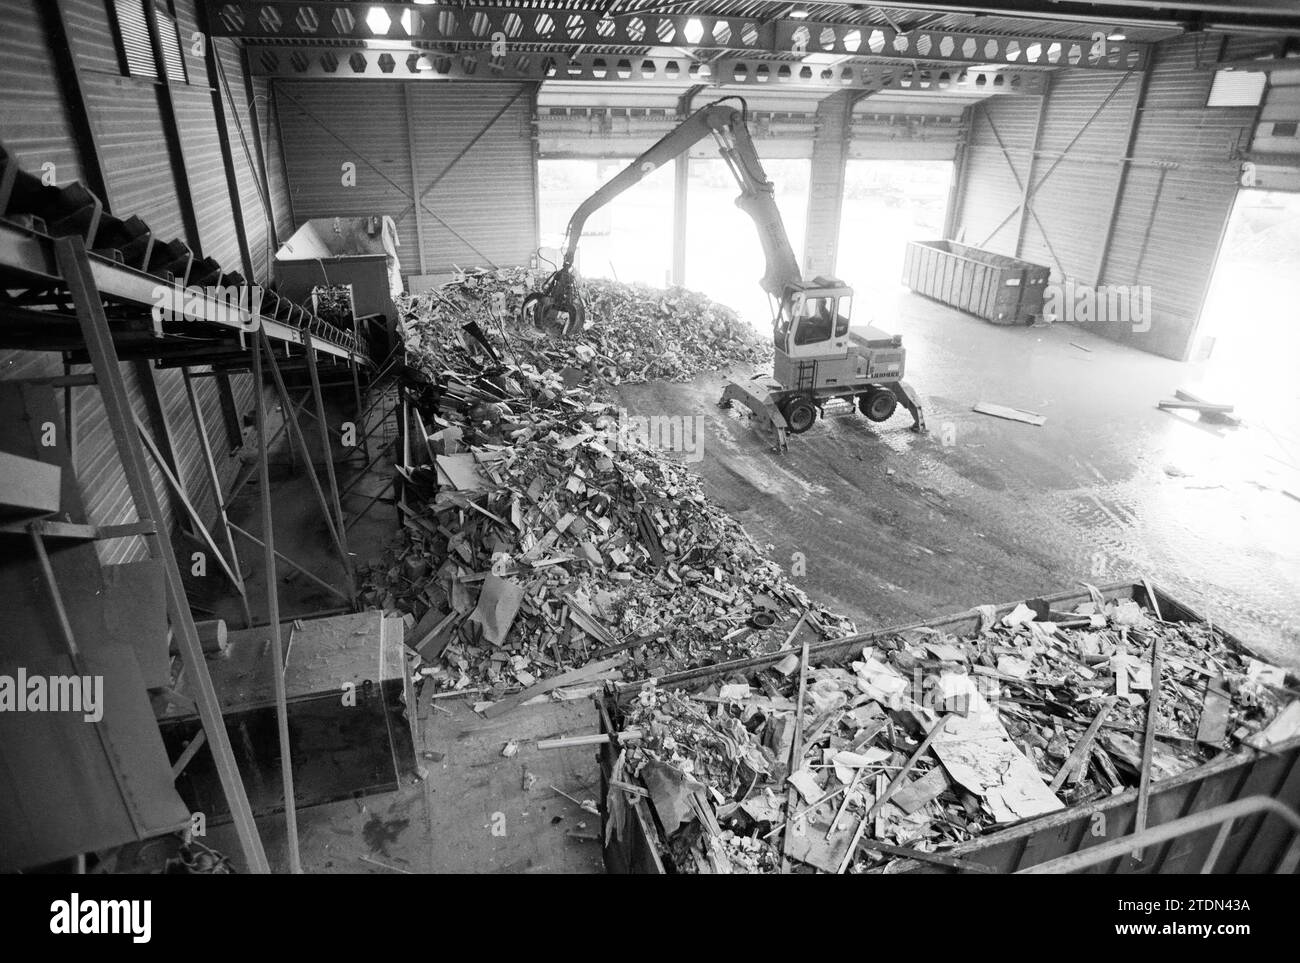 Fa. EHCO, bulky waste processing [First Haarlem Central Collection Service], 13-07-1993, Whizgle News from the Past, Tailored for the Future. Explore historical narratives, Dutch The Netherlands agency image with a modern perspective, bridging the gap between yesterday's events and tomorrow's insights. A timeless journey shaping the stories that shape our future Stock Photo